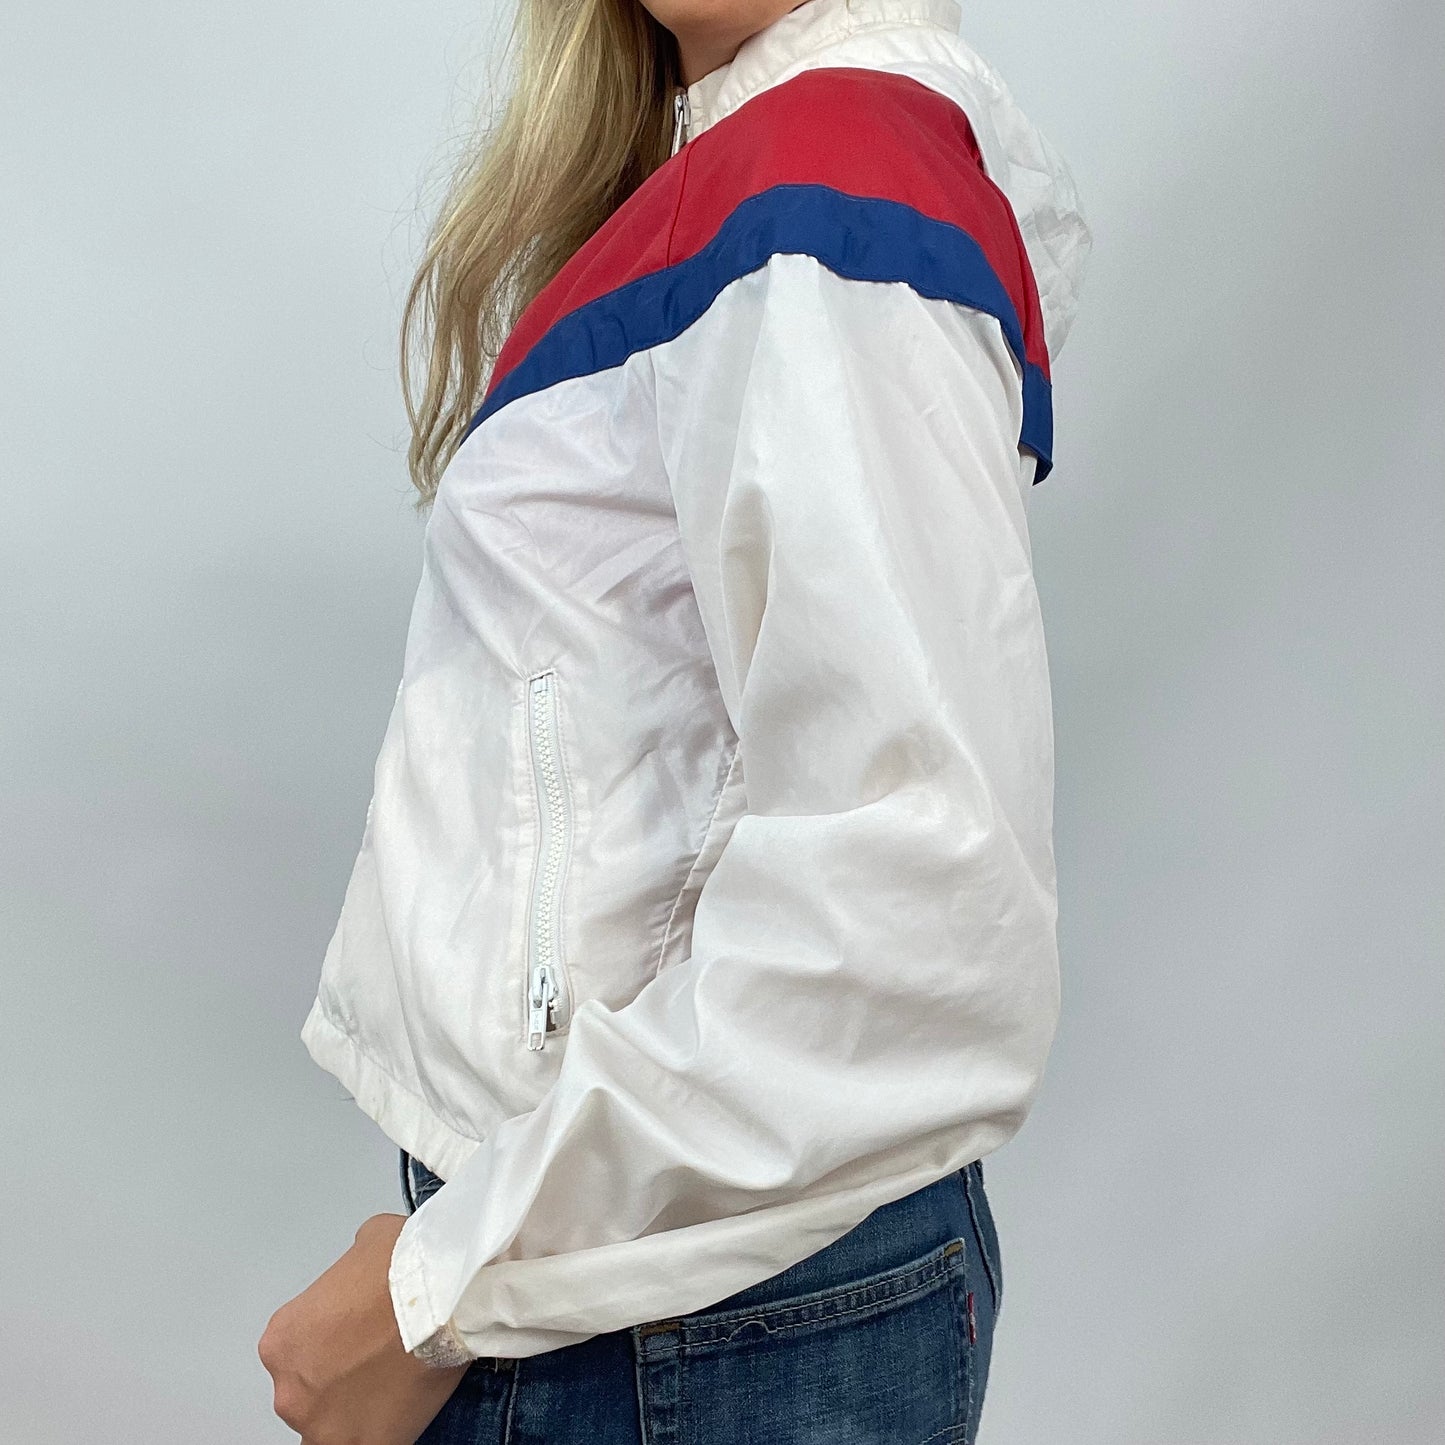 HAILEY BIEBER DROP | small white, red & blue nike shell style zip up